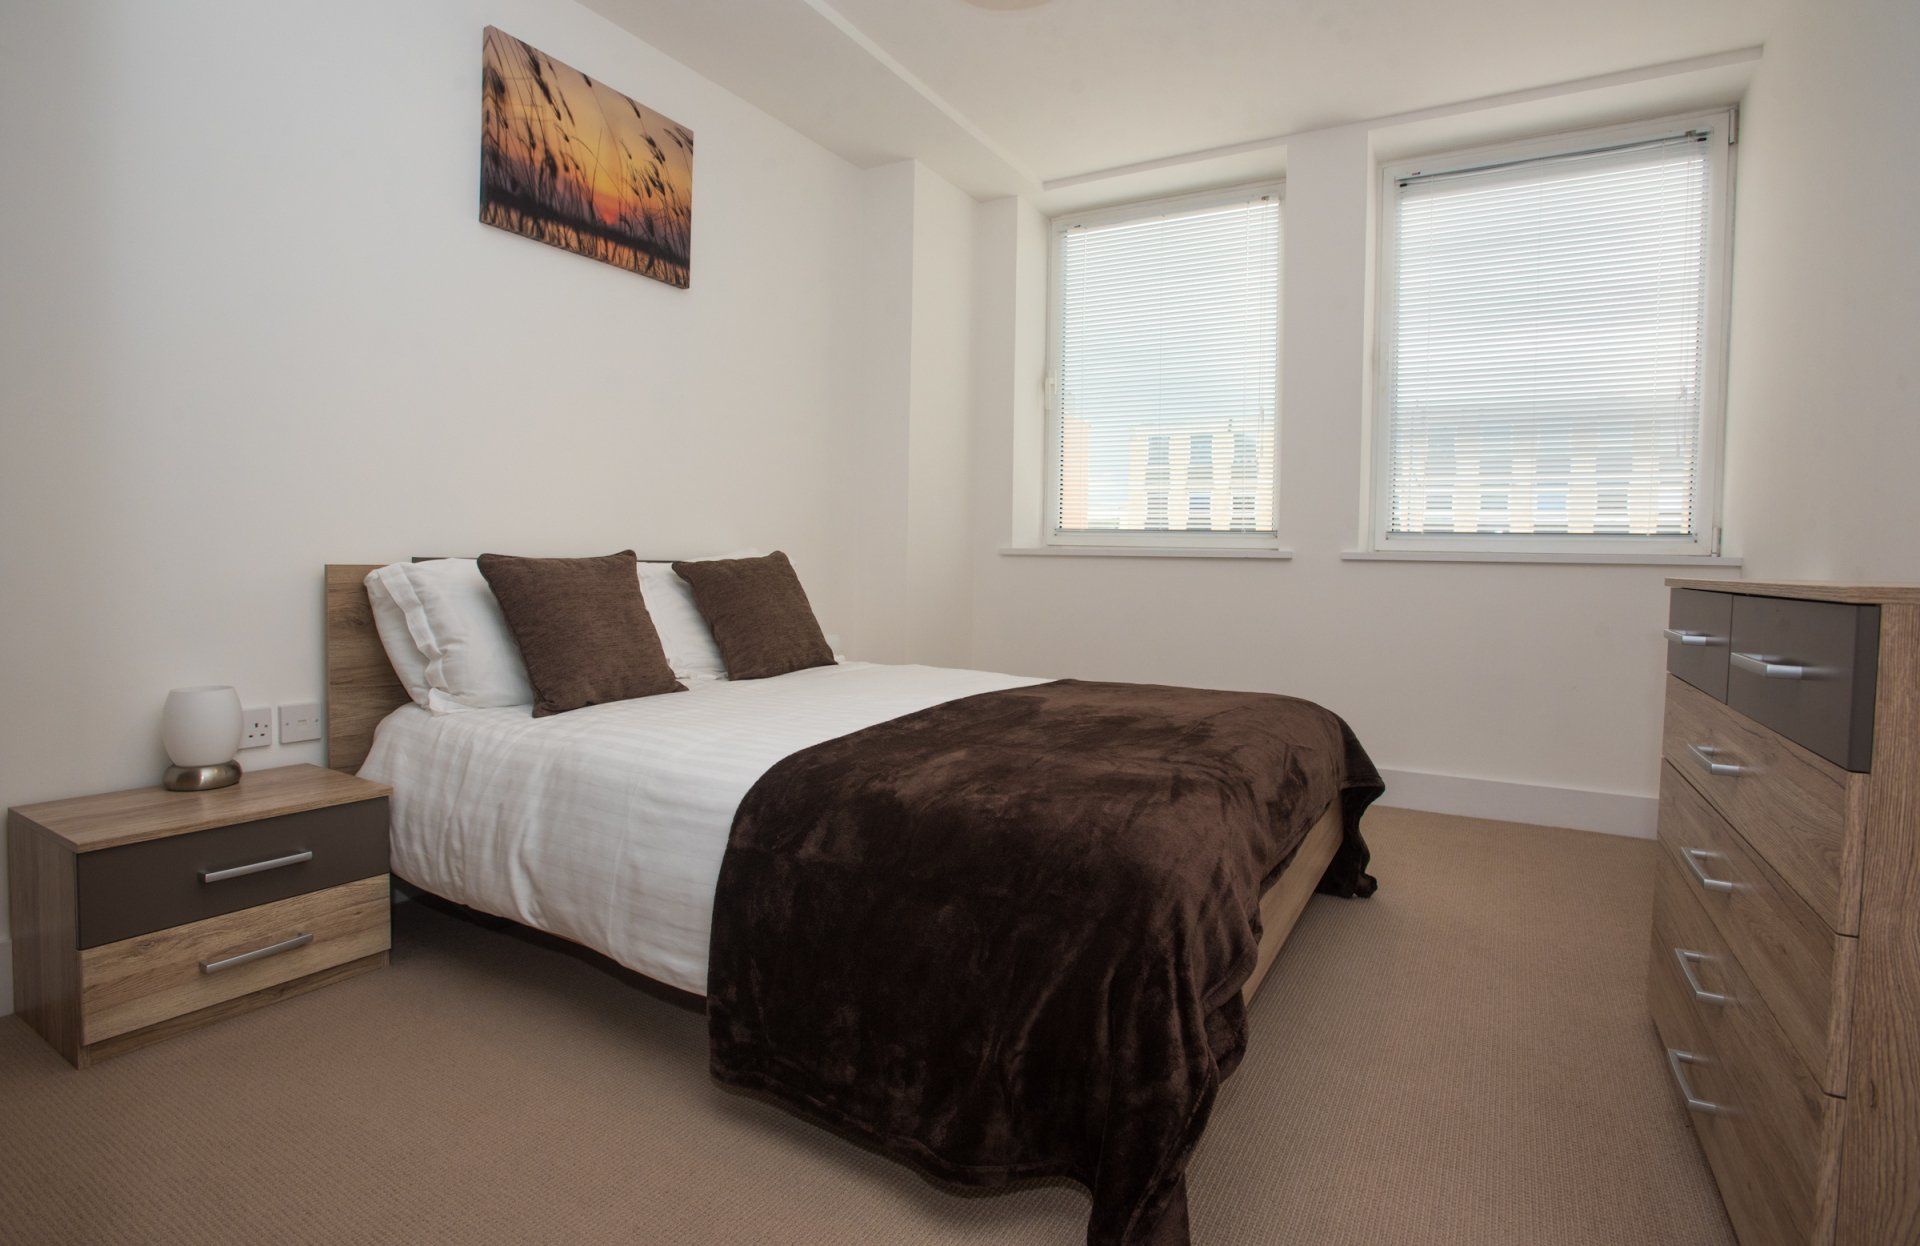 Sussex House Celador Serviced apartment in Reading bedroom